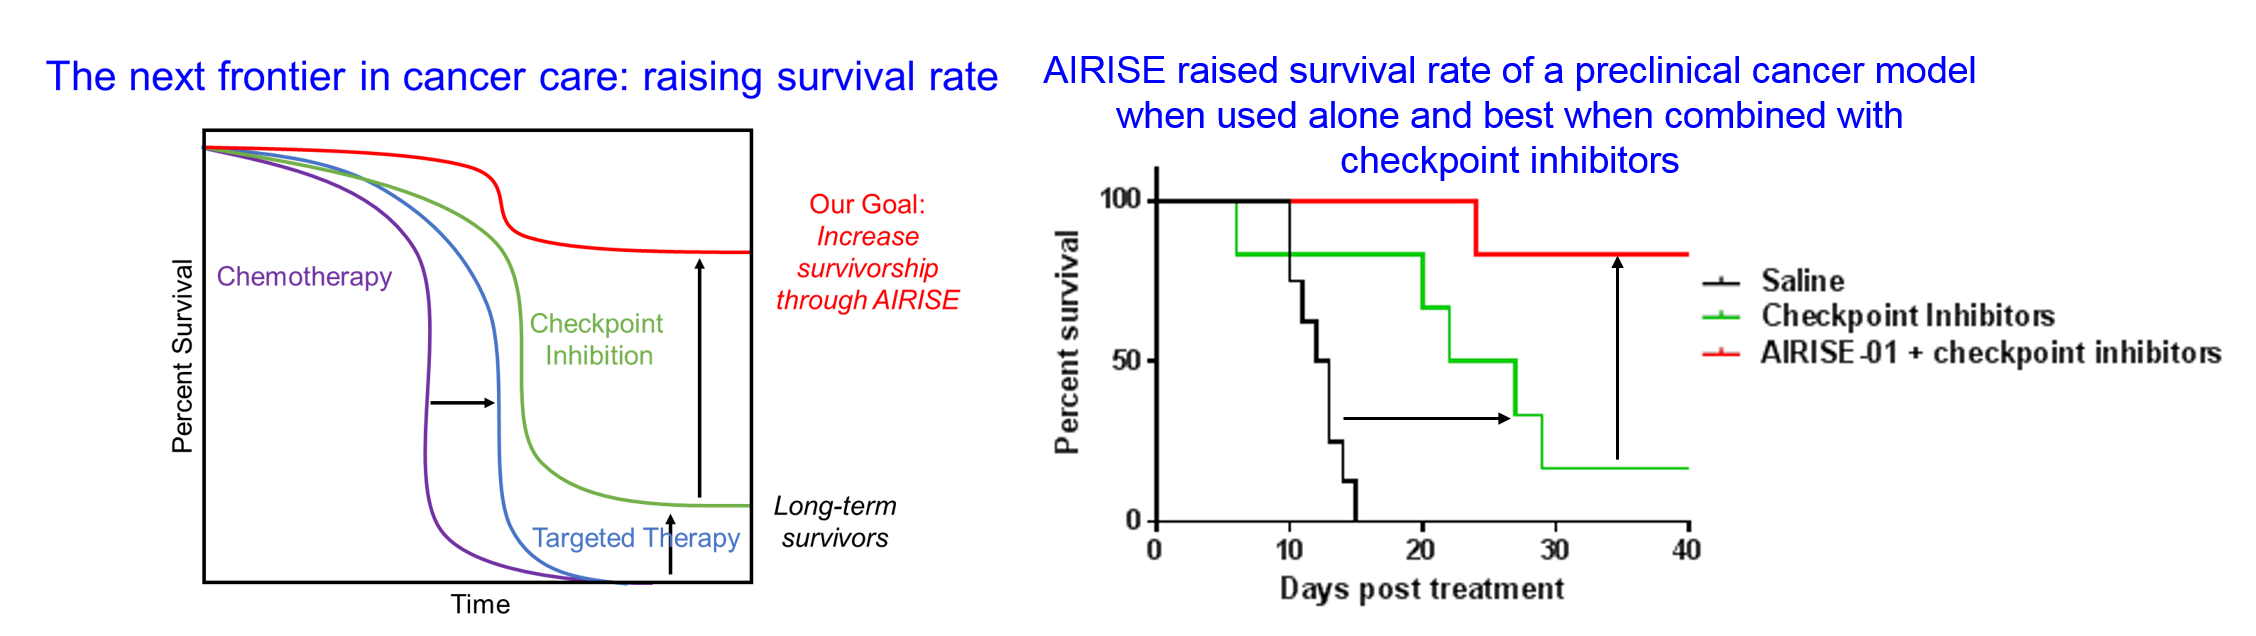 The next frontier in caner care: raising survival rate. AIRISE raised survival rate of a preclinical cancer model when used alone and best when combined with checkpoint inhibitors.